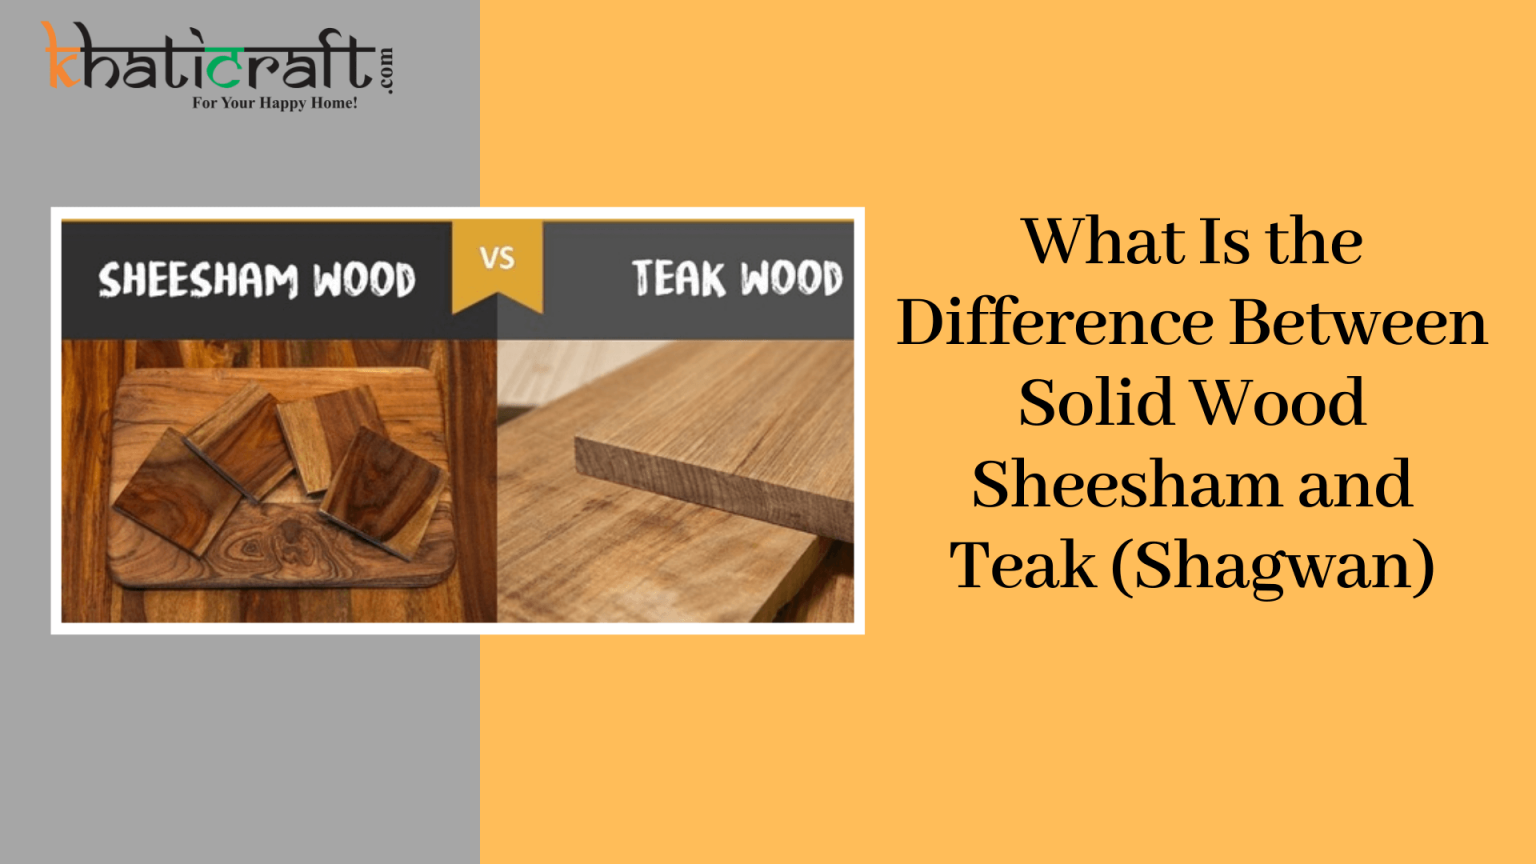 What Is the Difference Between Solid Wood Sheesham and Teak (Shagwan)